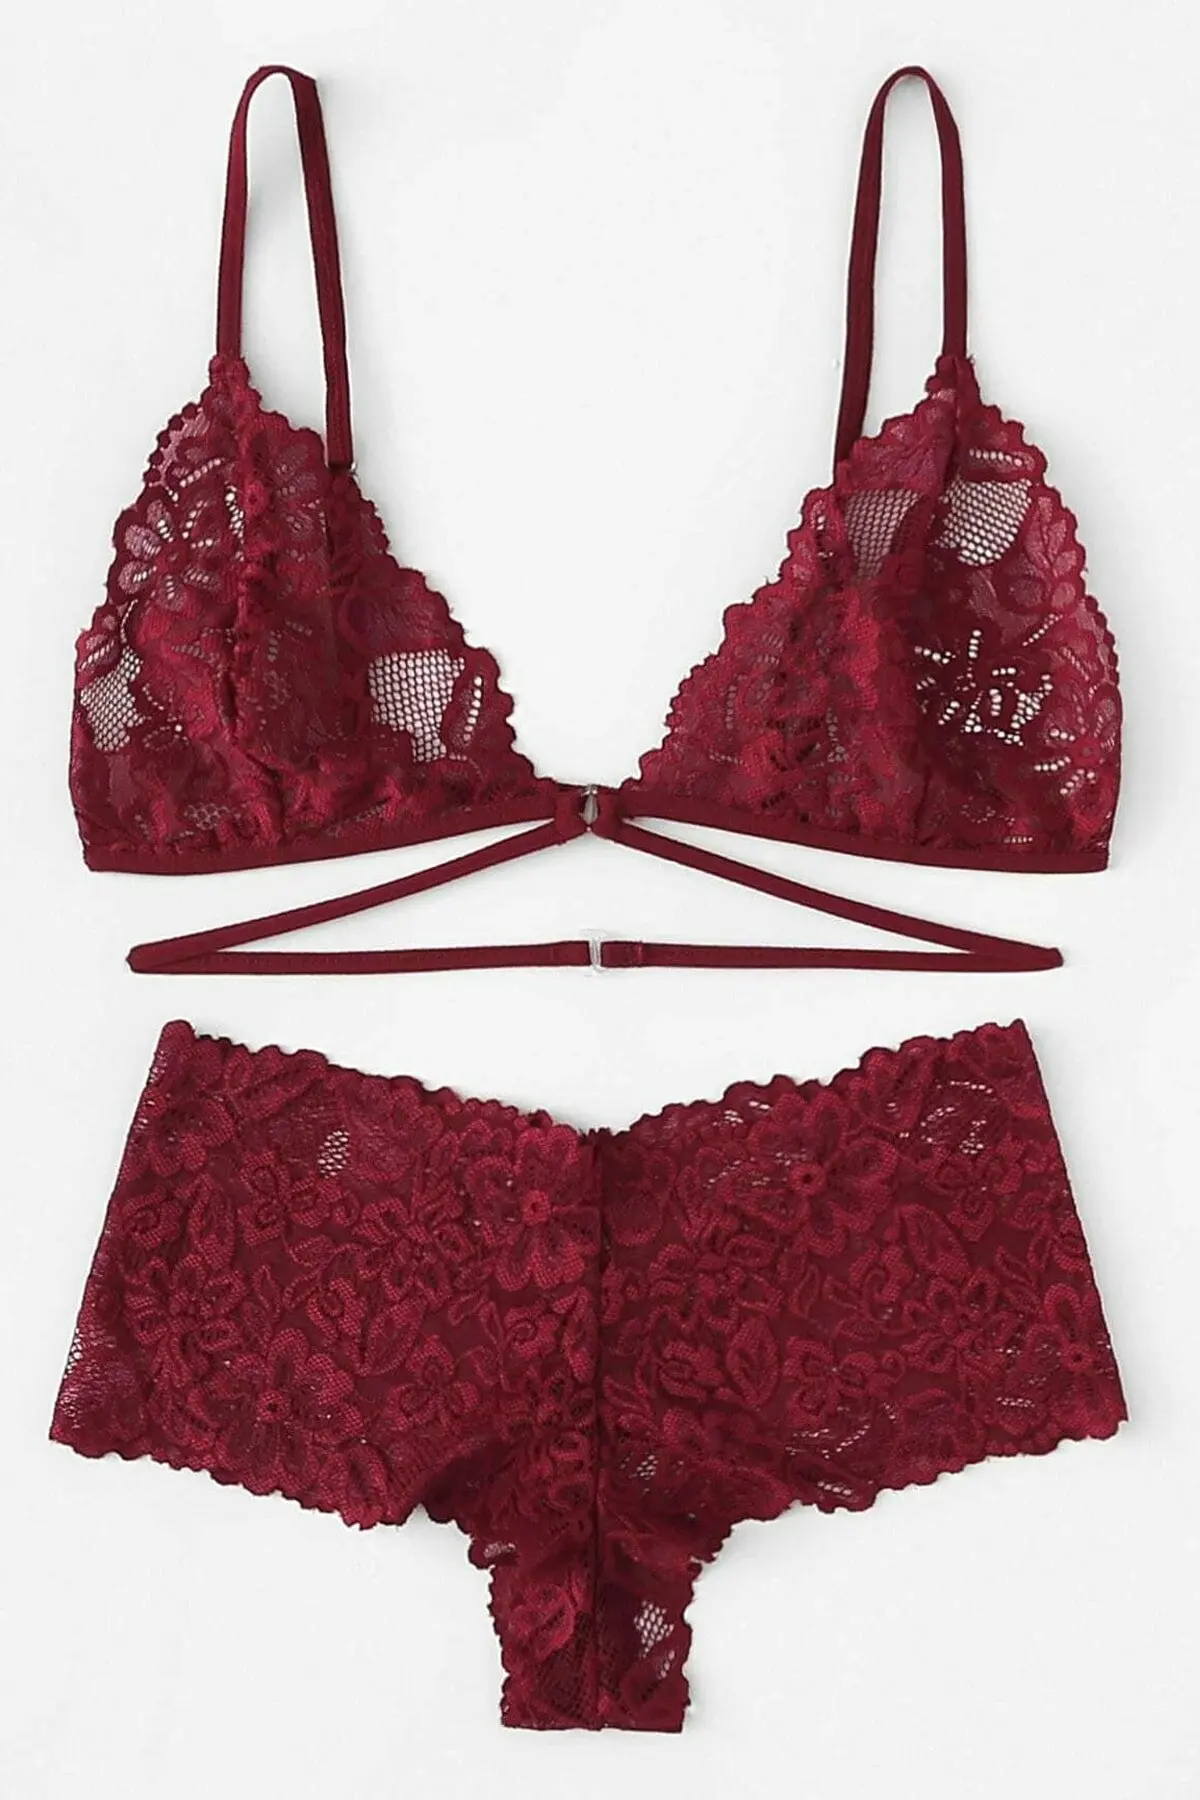 LOOK FOR YOUR WONDERFUL NIGHTS WITH ITS STUNNING COLOR Women's Claret Red Special Stylish Bra Panty Set  FREE SHIPPING